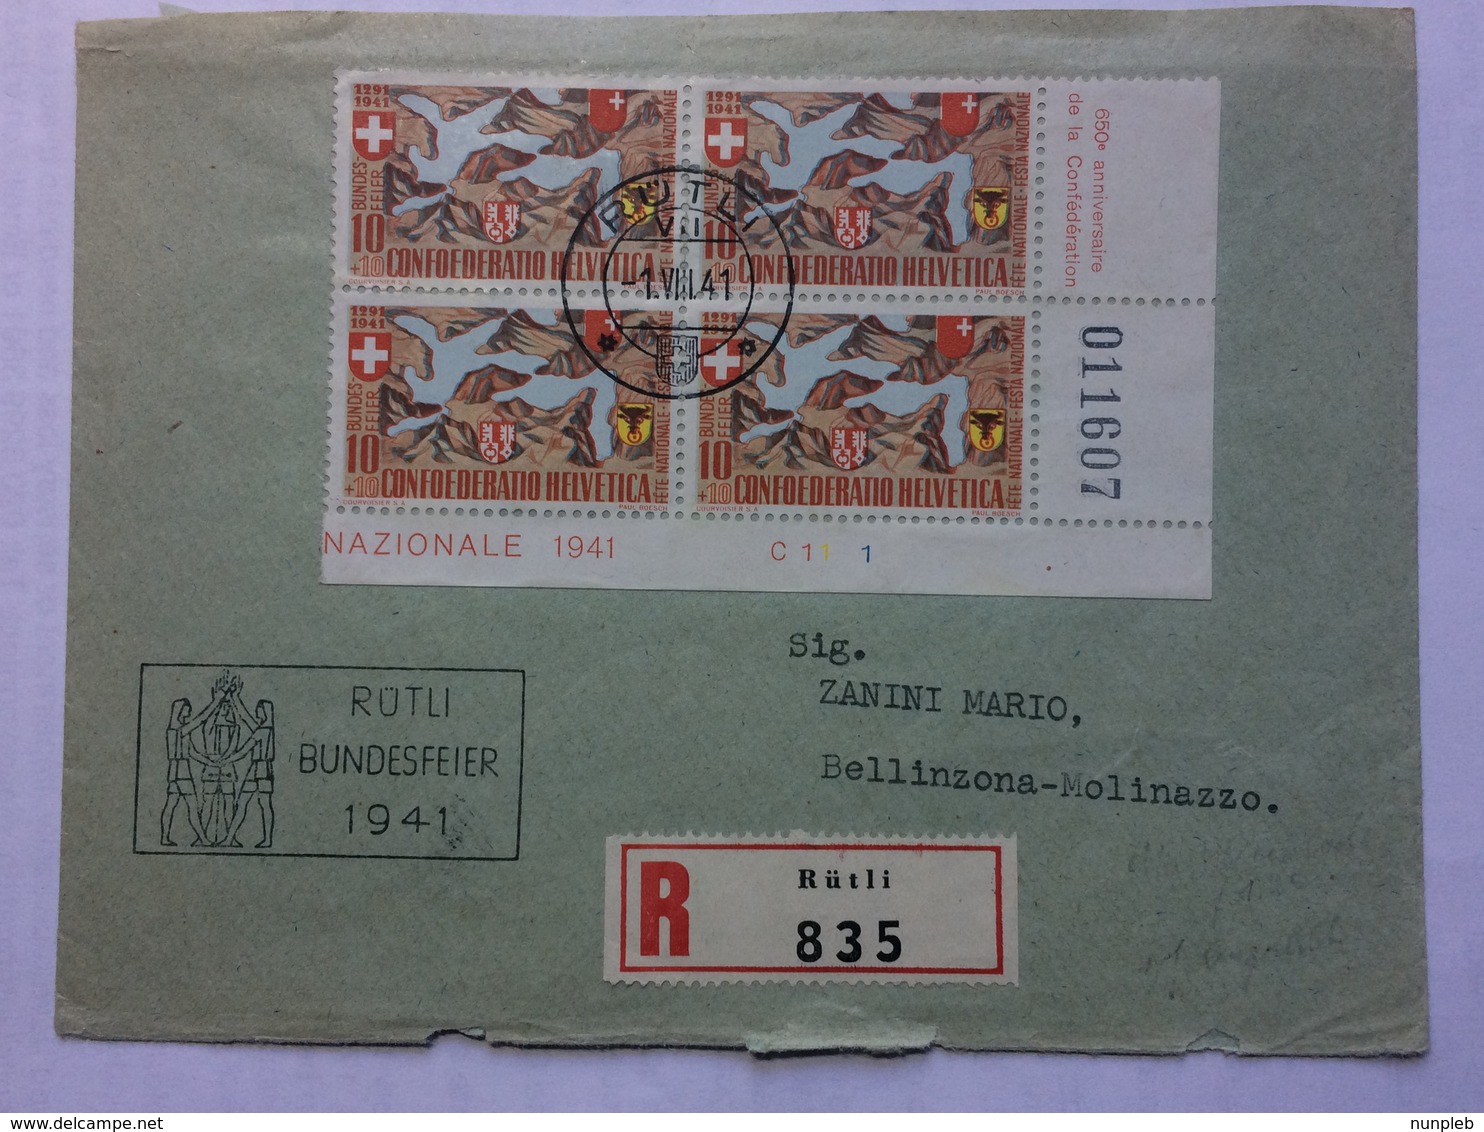 SWITZERLAND 1941 Cover Registered Rutli To Molinazzo Tied With Confederation Block Of 4 - Covers & Documents